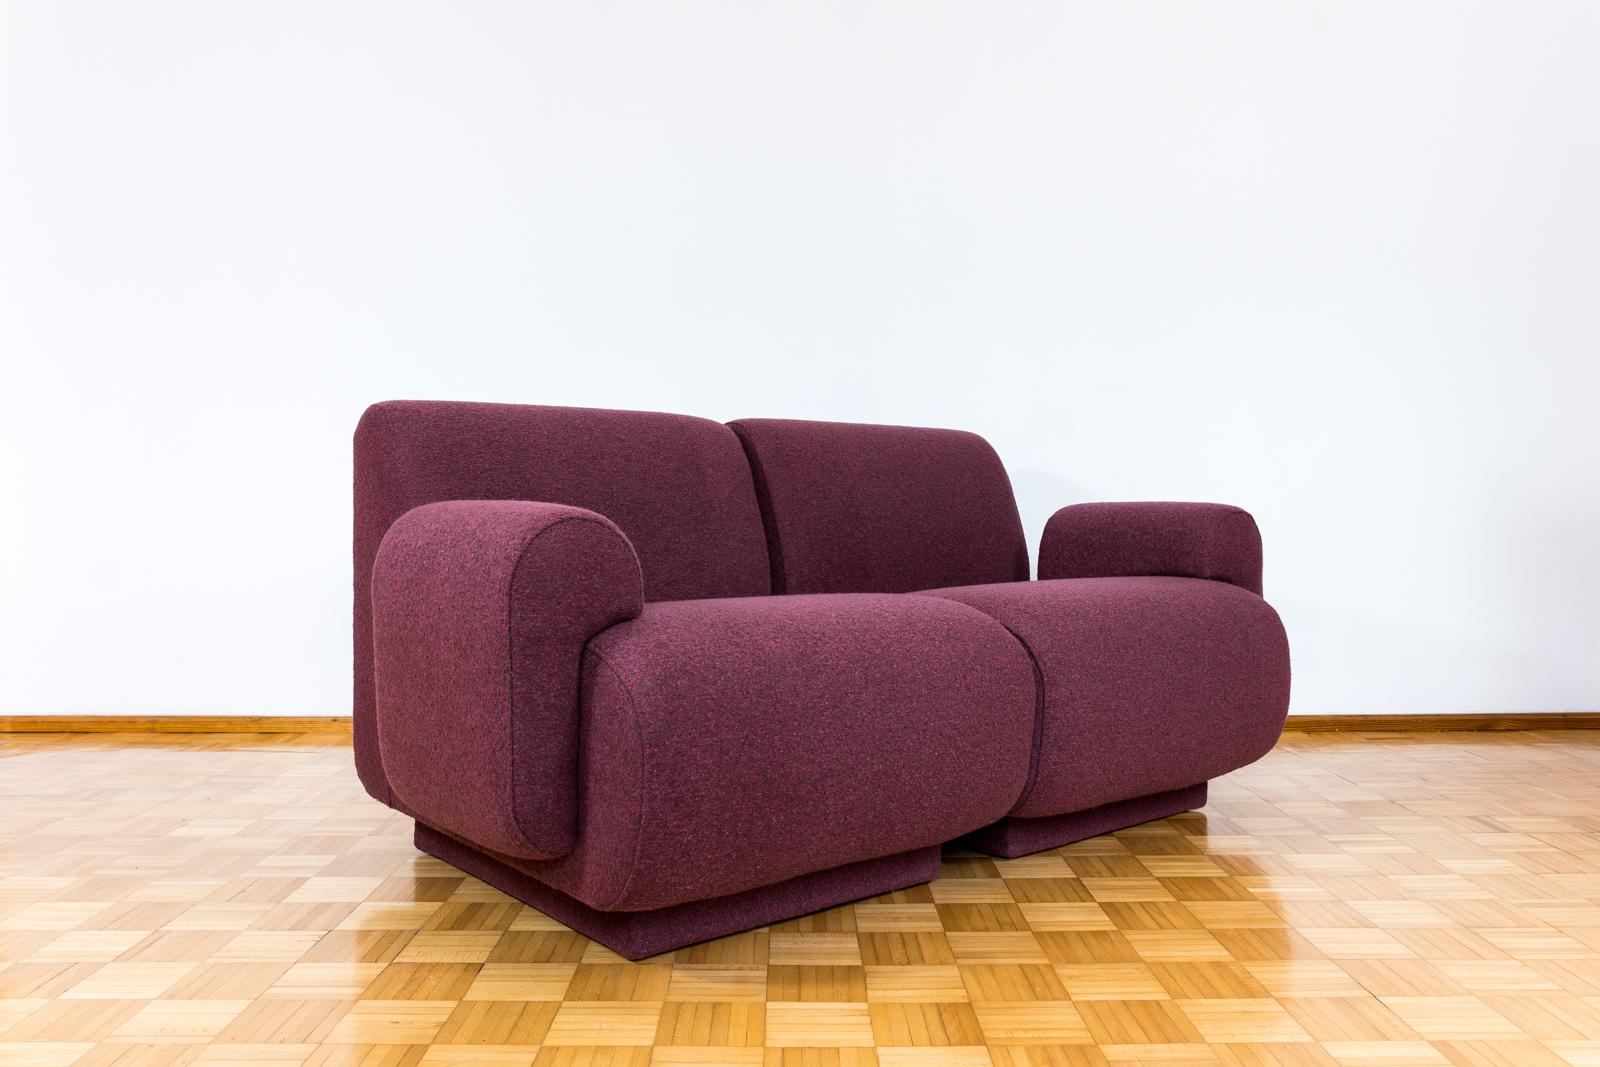 Pair Of Purple Modular Lounge Chairs, 1970, Germany For Sale 3